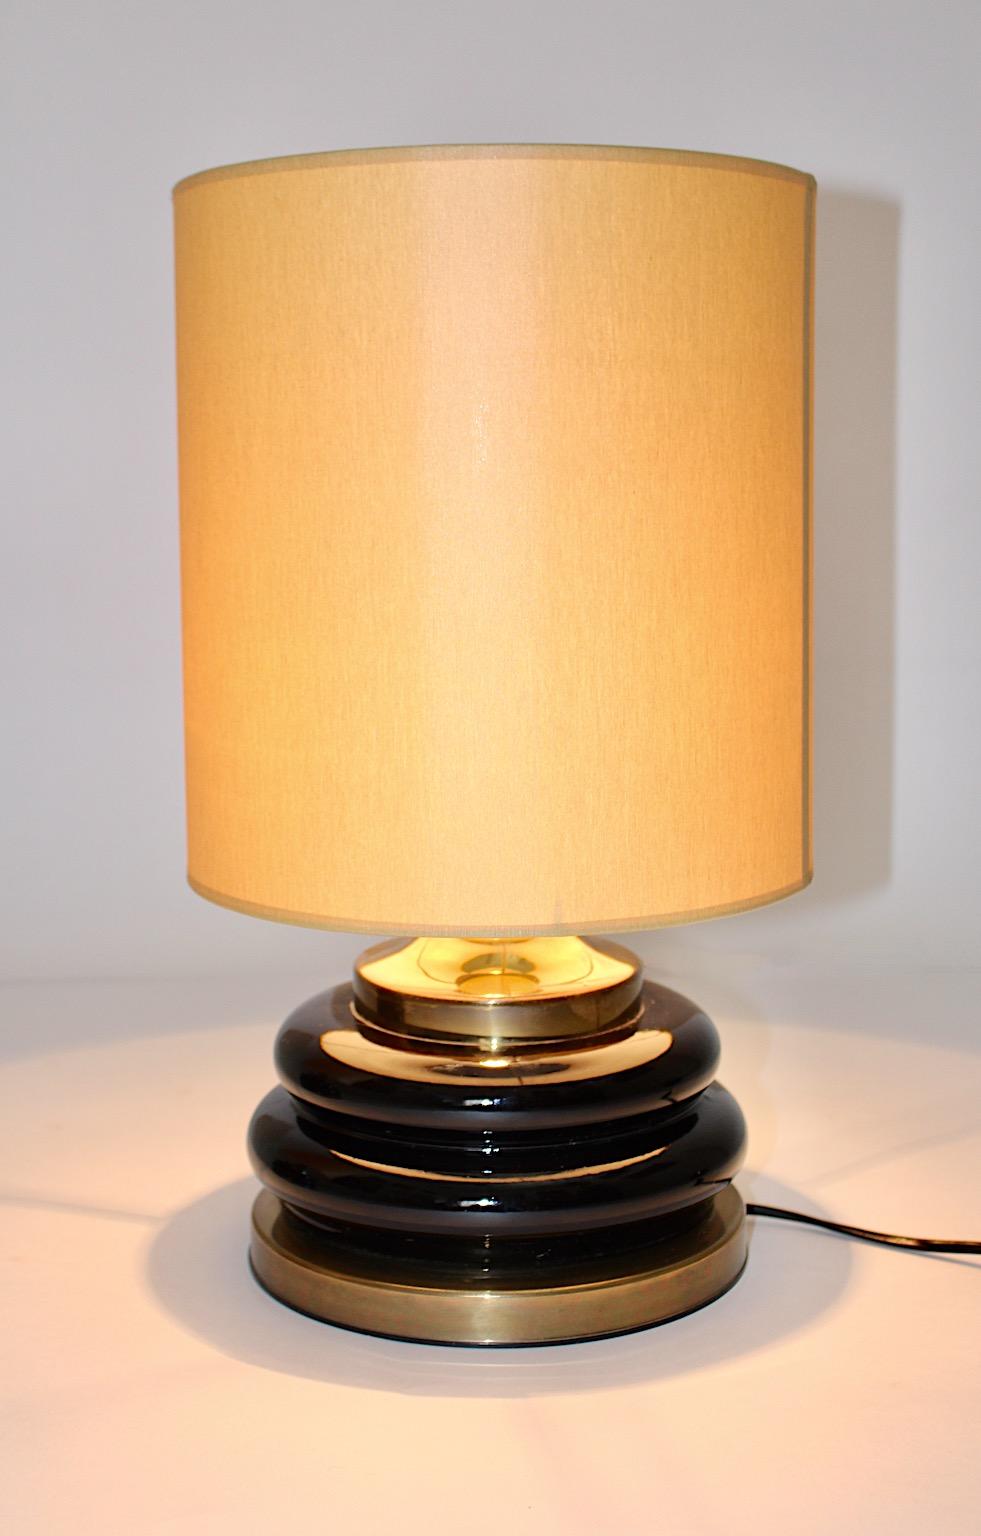 Modernist Brown Gold Glass Vintage Table Lamps Pair Duo, 1970s, Italy For Sale 1